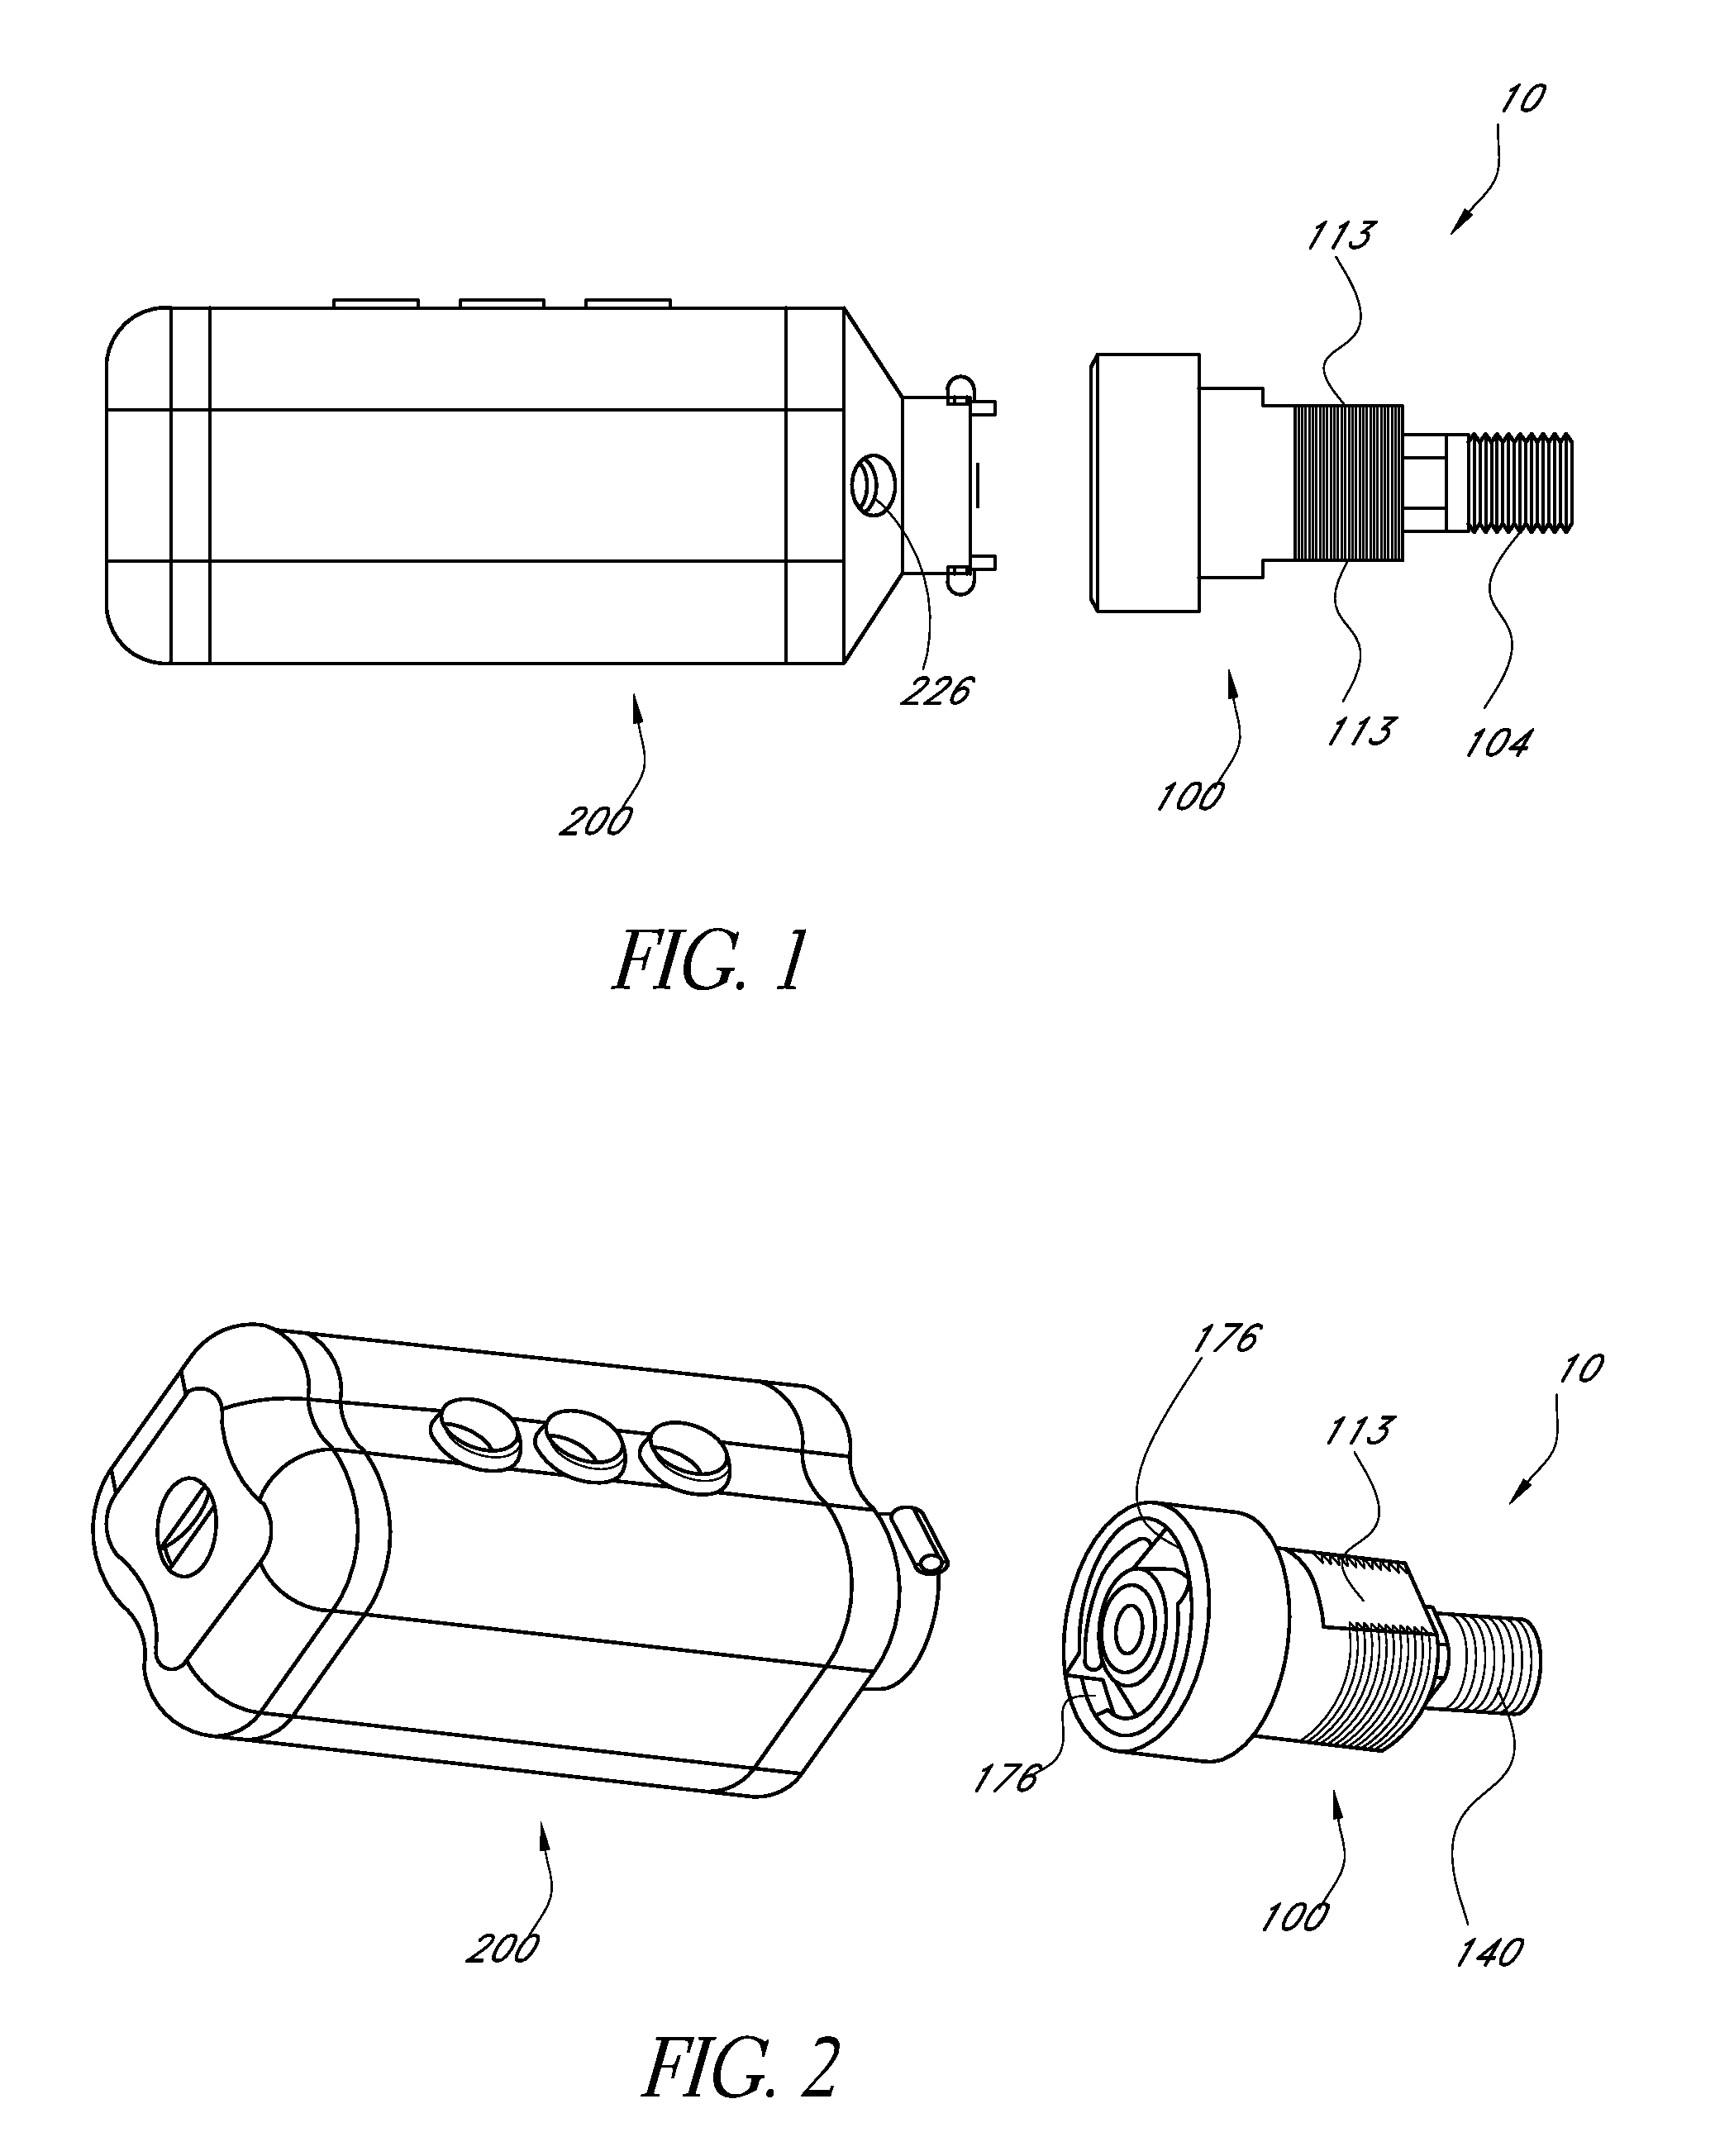 Capacitive data transfer in an electronic lock and key assembly